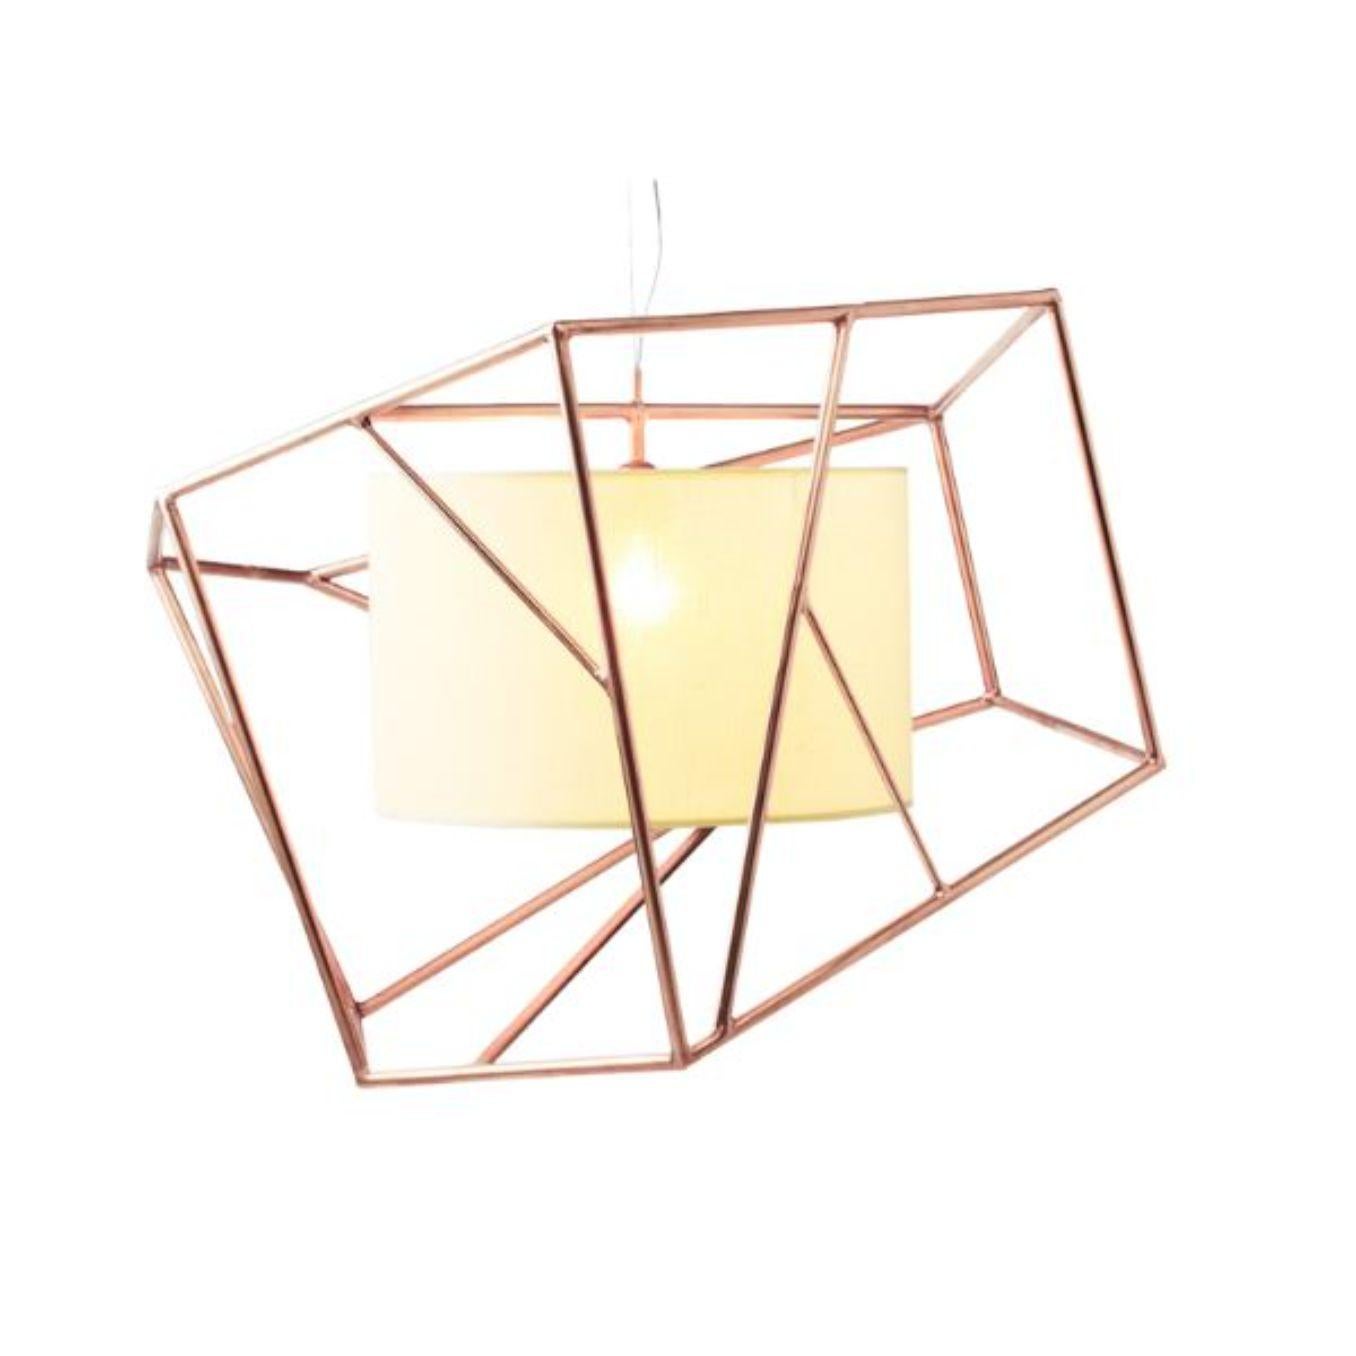 Copper Star suspension lamp by Dooq
Dimensions: W 80 x D 80 x H 70 cm
Materials: lacquered metal, polished or satin metal, copper.
abat-jour: linen
Also available in different colors and materials.

Information:
230V/50Hz
E27/1x20W